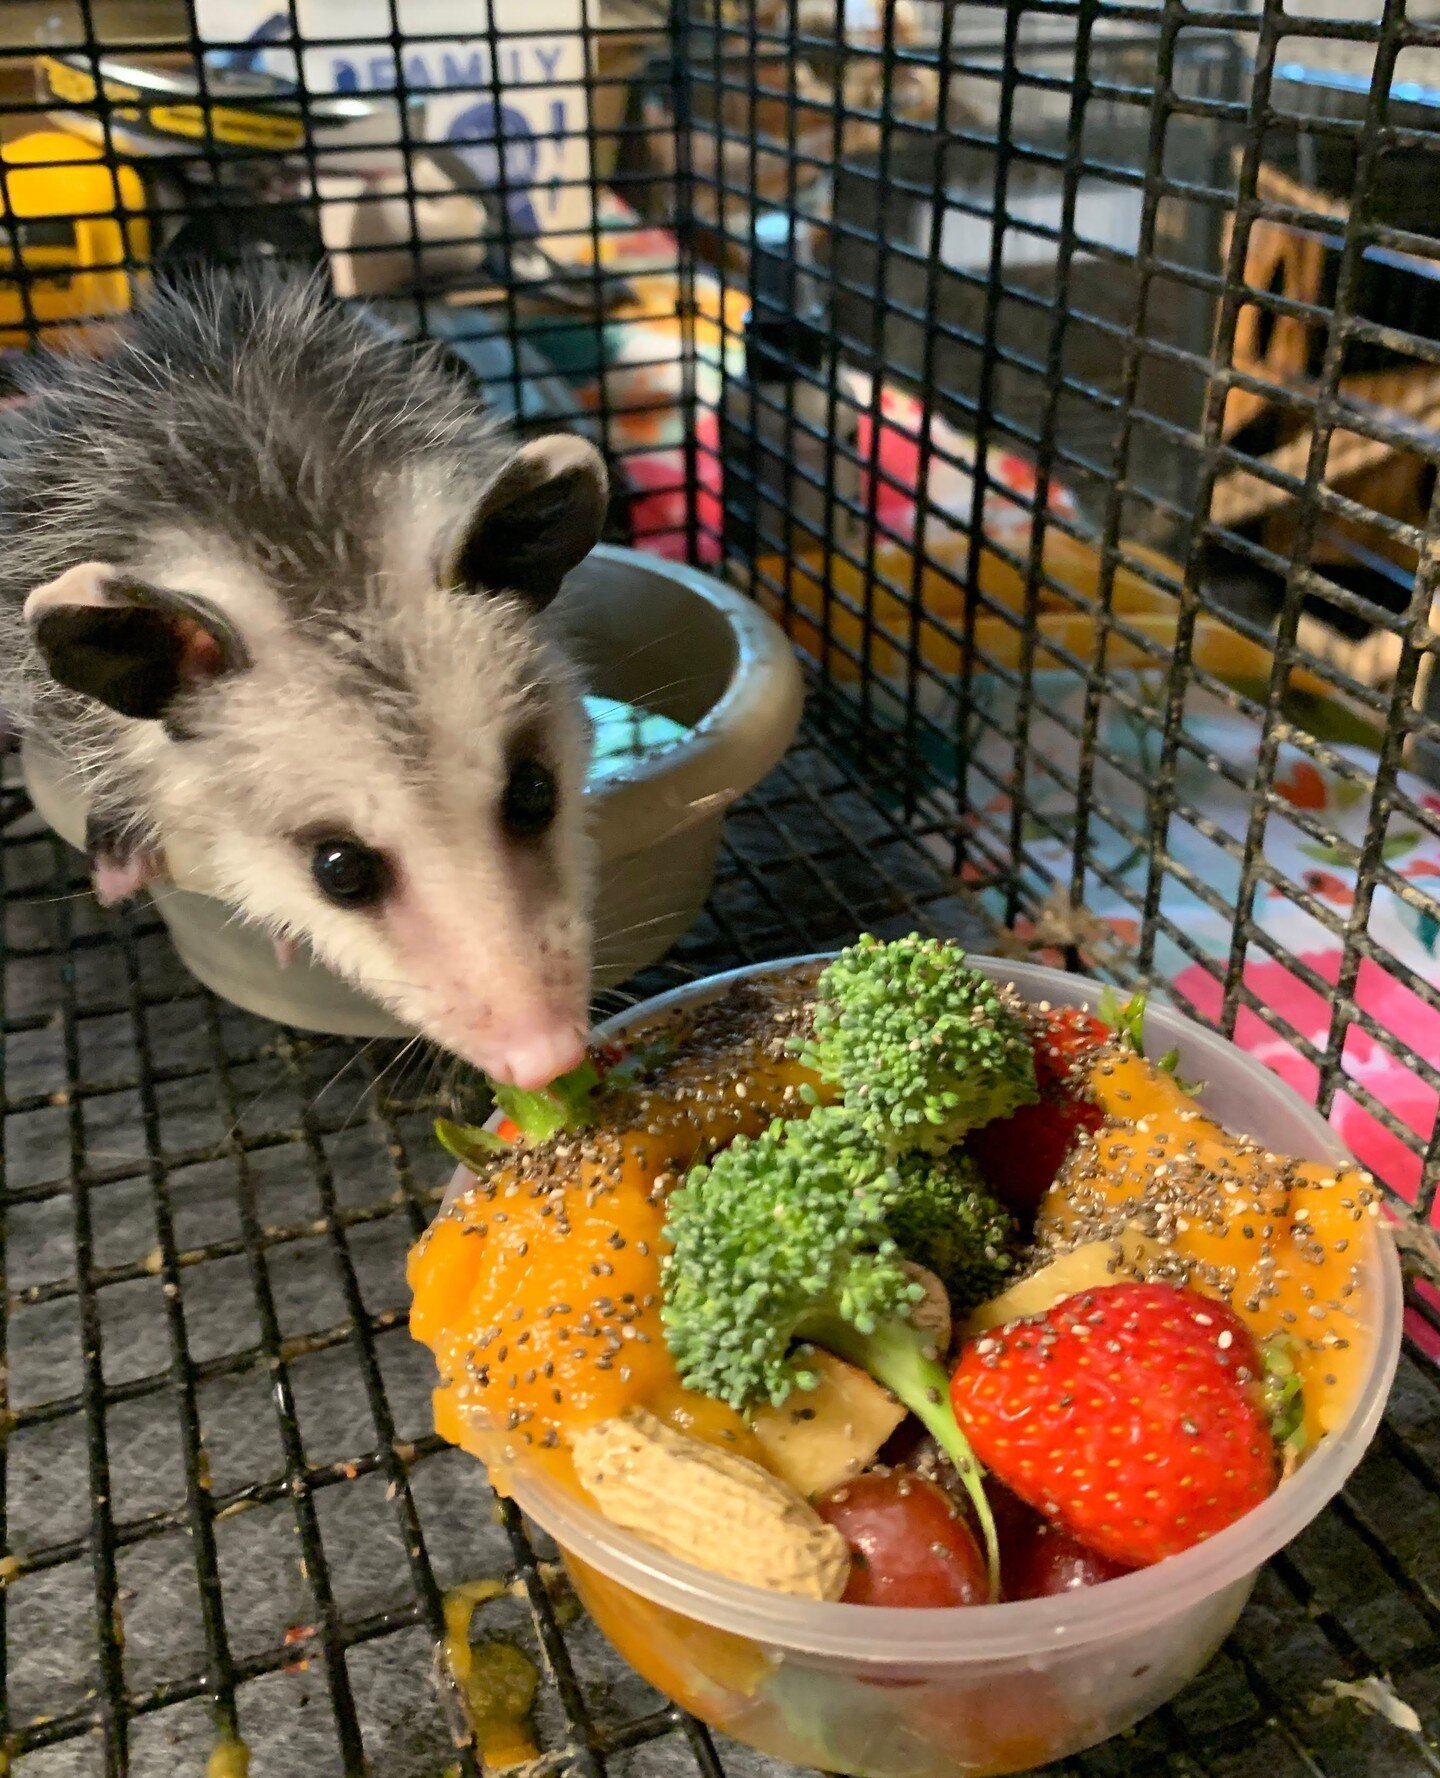 They really do eat better than I do. Thanks to our generous donors who've been supplying surplus produce lately! Our bellies are full, and our hearts are happy!